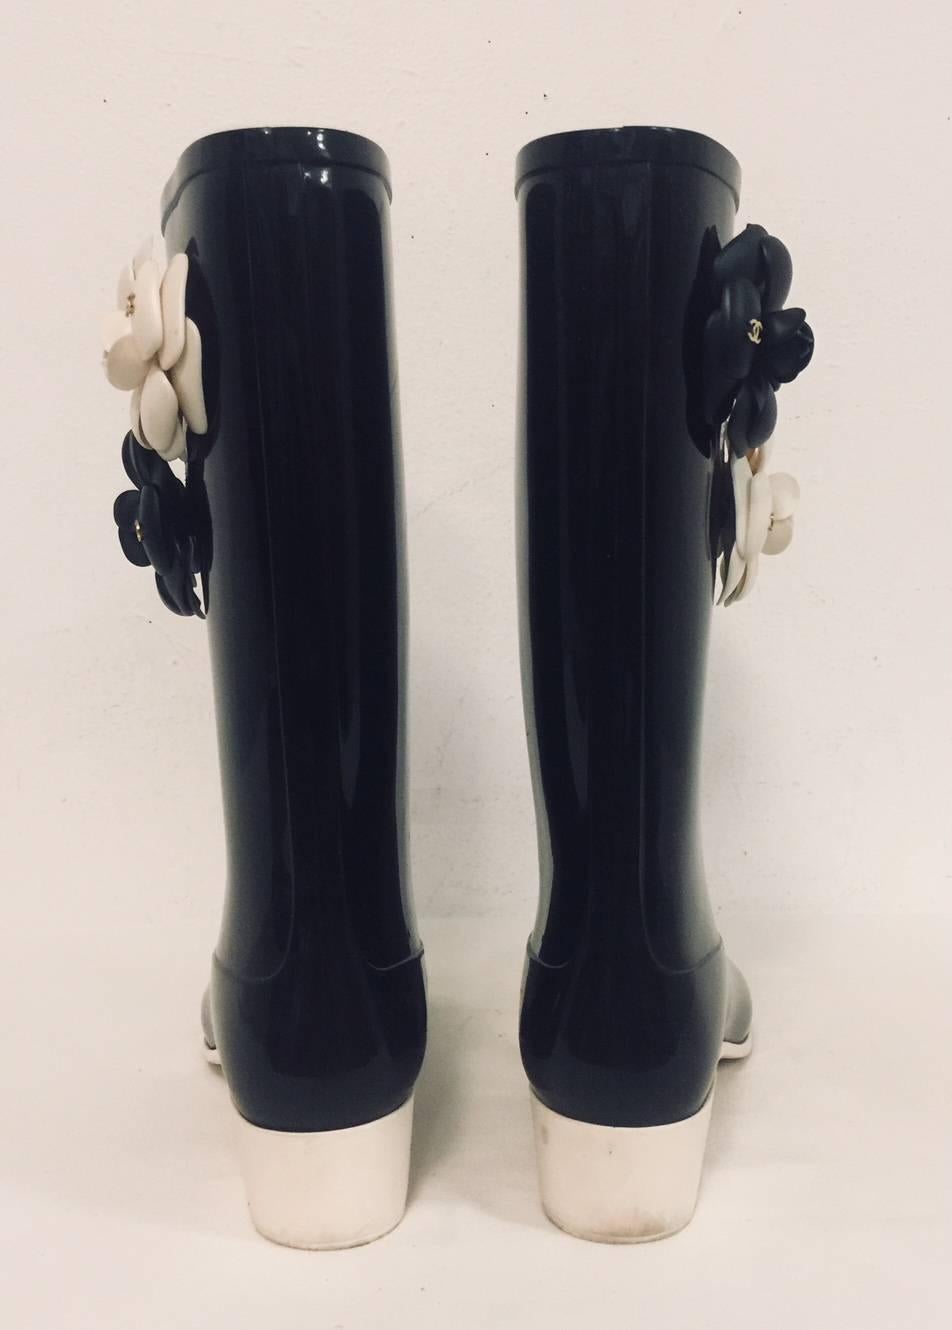 Chanel Black Wellington Boots prove that function can be fashionable...HIGHLY fashionable! A rainy forecast will be welcomed by anyone wearing these distinctly Chanel Wellington Boots. Features black glossy waterproof material and cap toe with